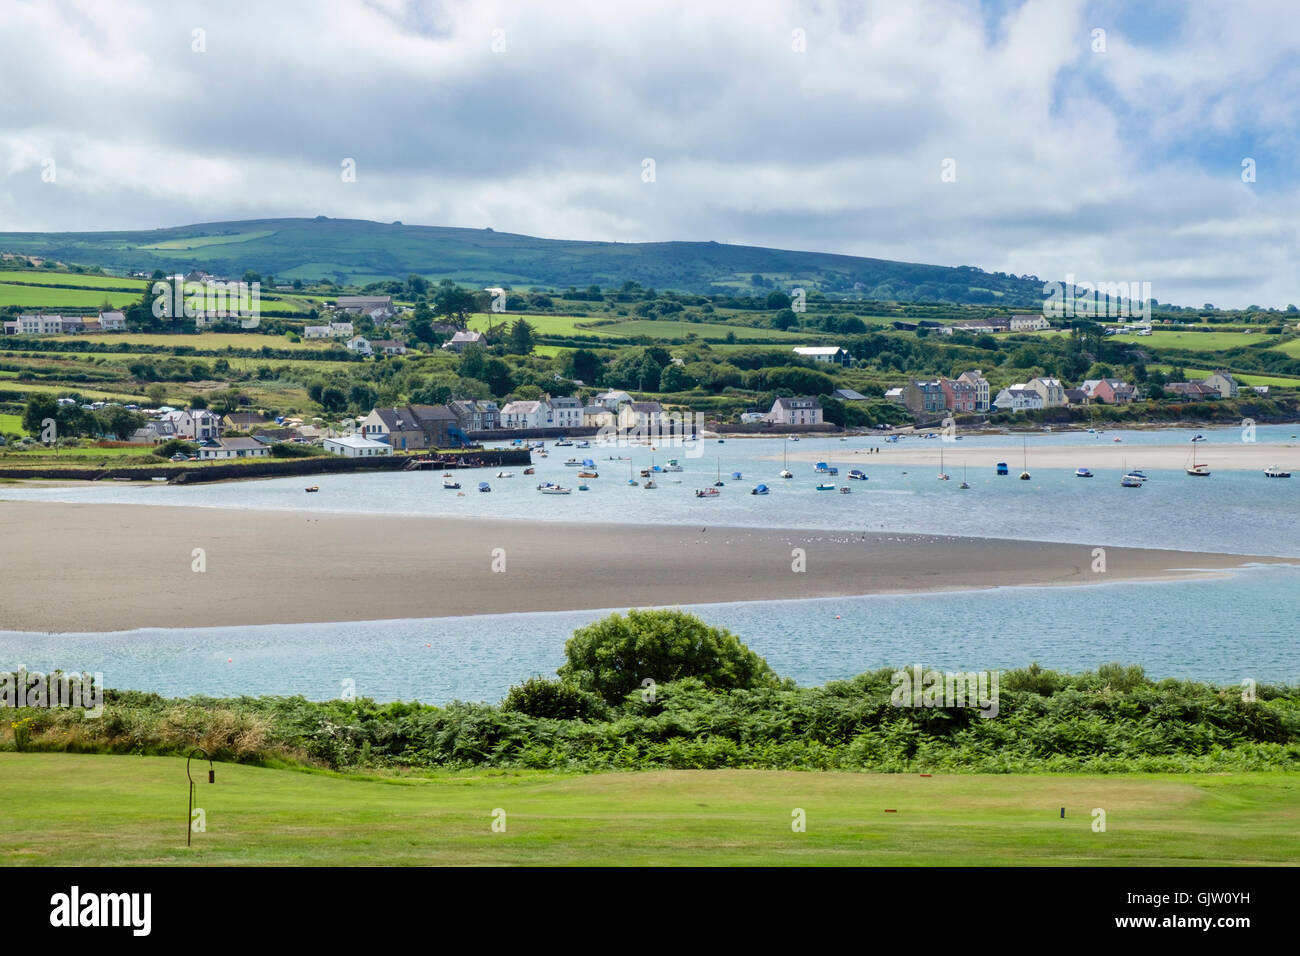 View across golf course and Afon Nyfer river estuary to Newport Sands and village at high tide. Newport Pembrokeshire Wales UK Stock Photo